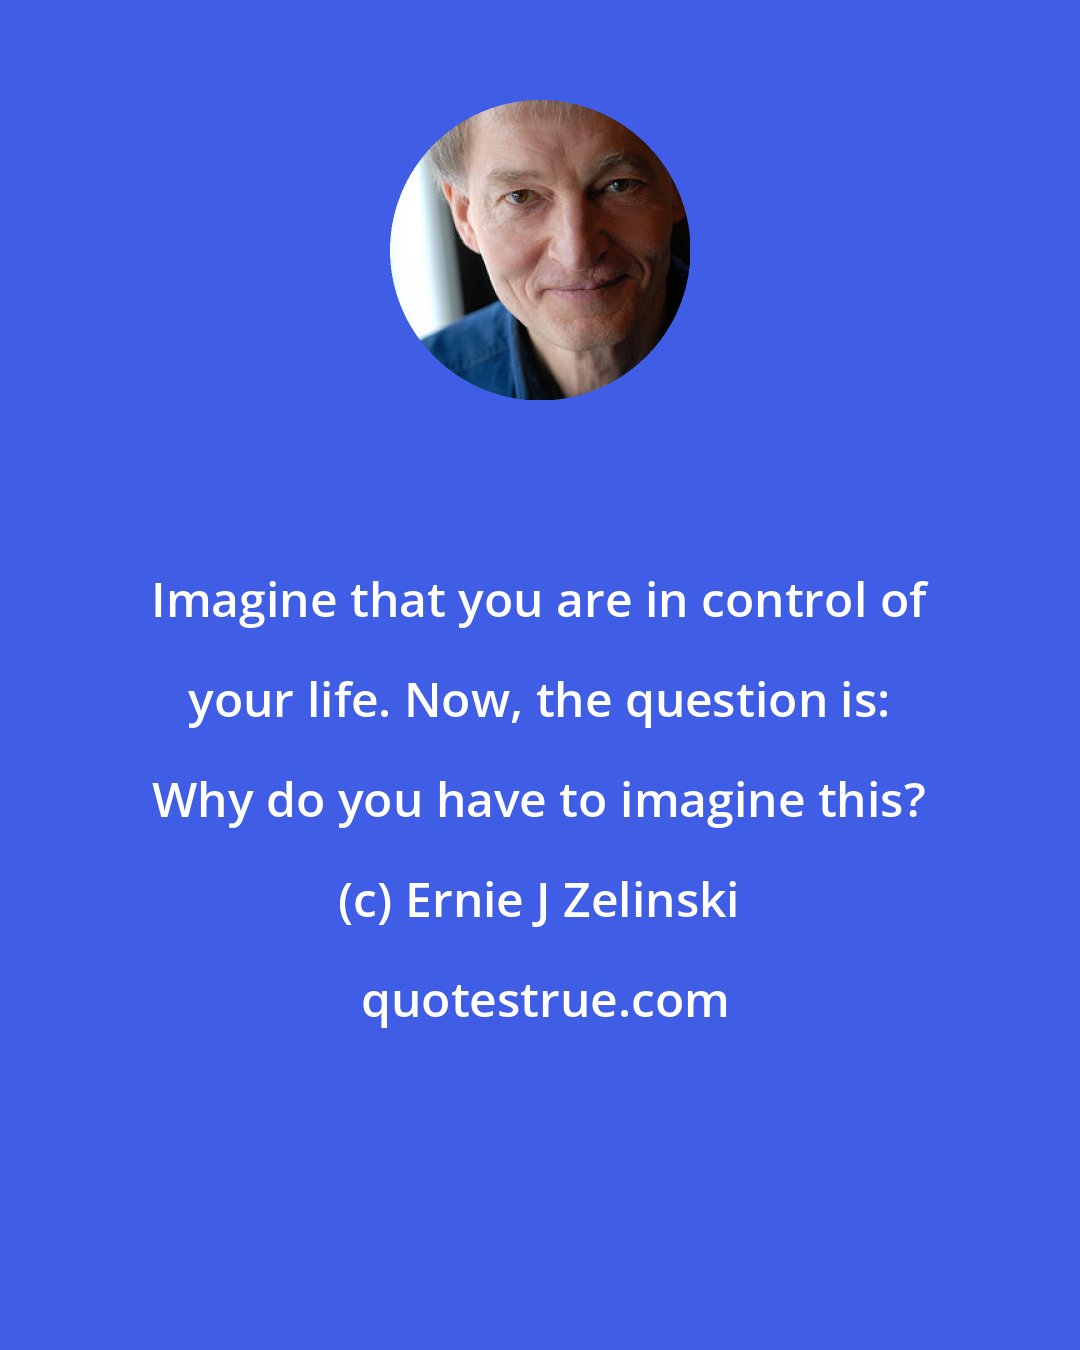 Ernie J Zelinski: Imagine that you are in control of your life. Now, the question is: Why do you have to imagine this?